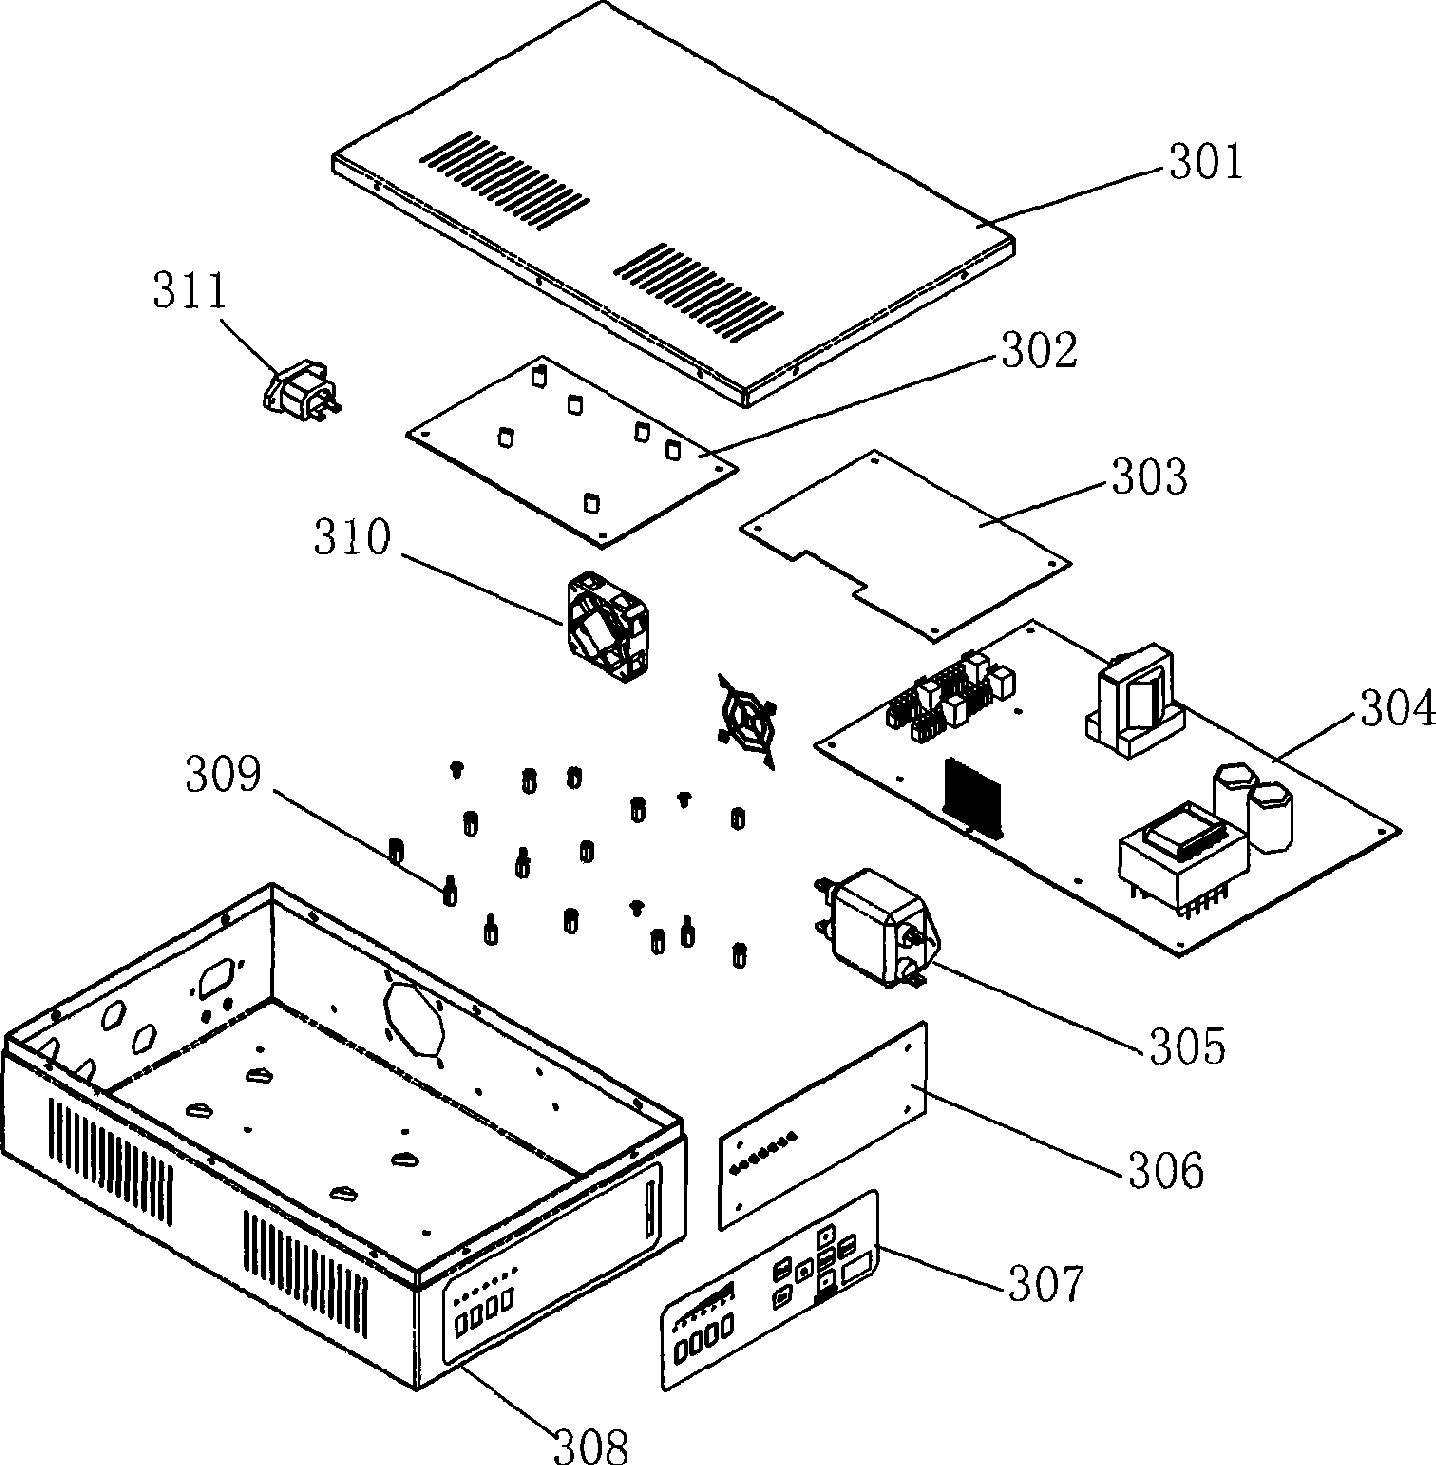 Electronic label detecting method for EAS